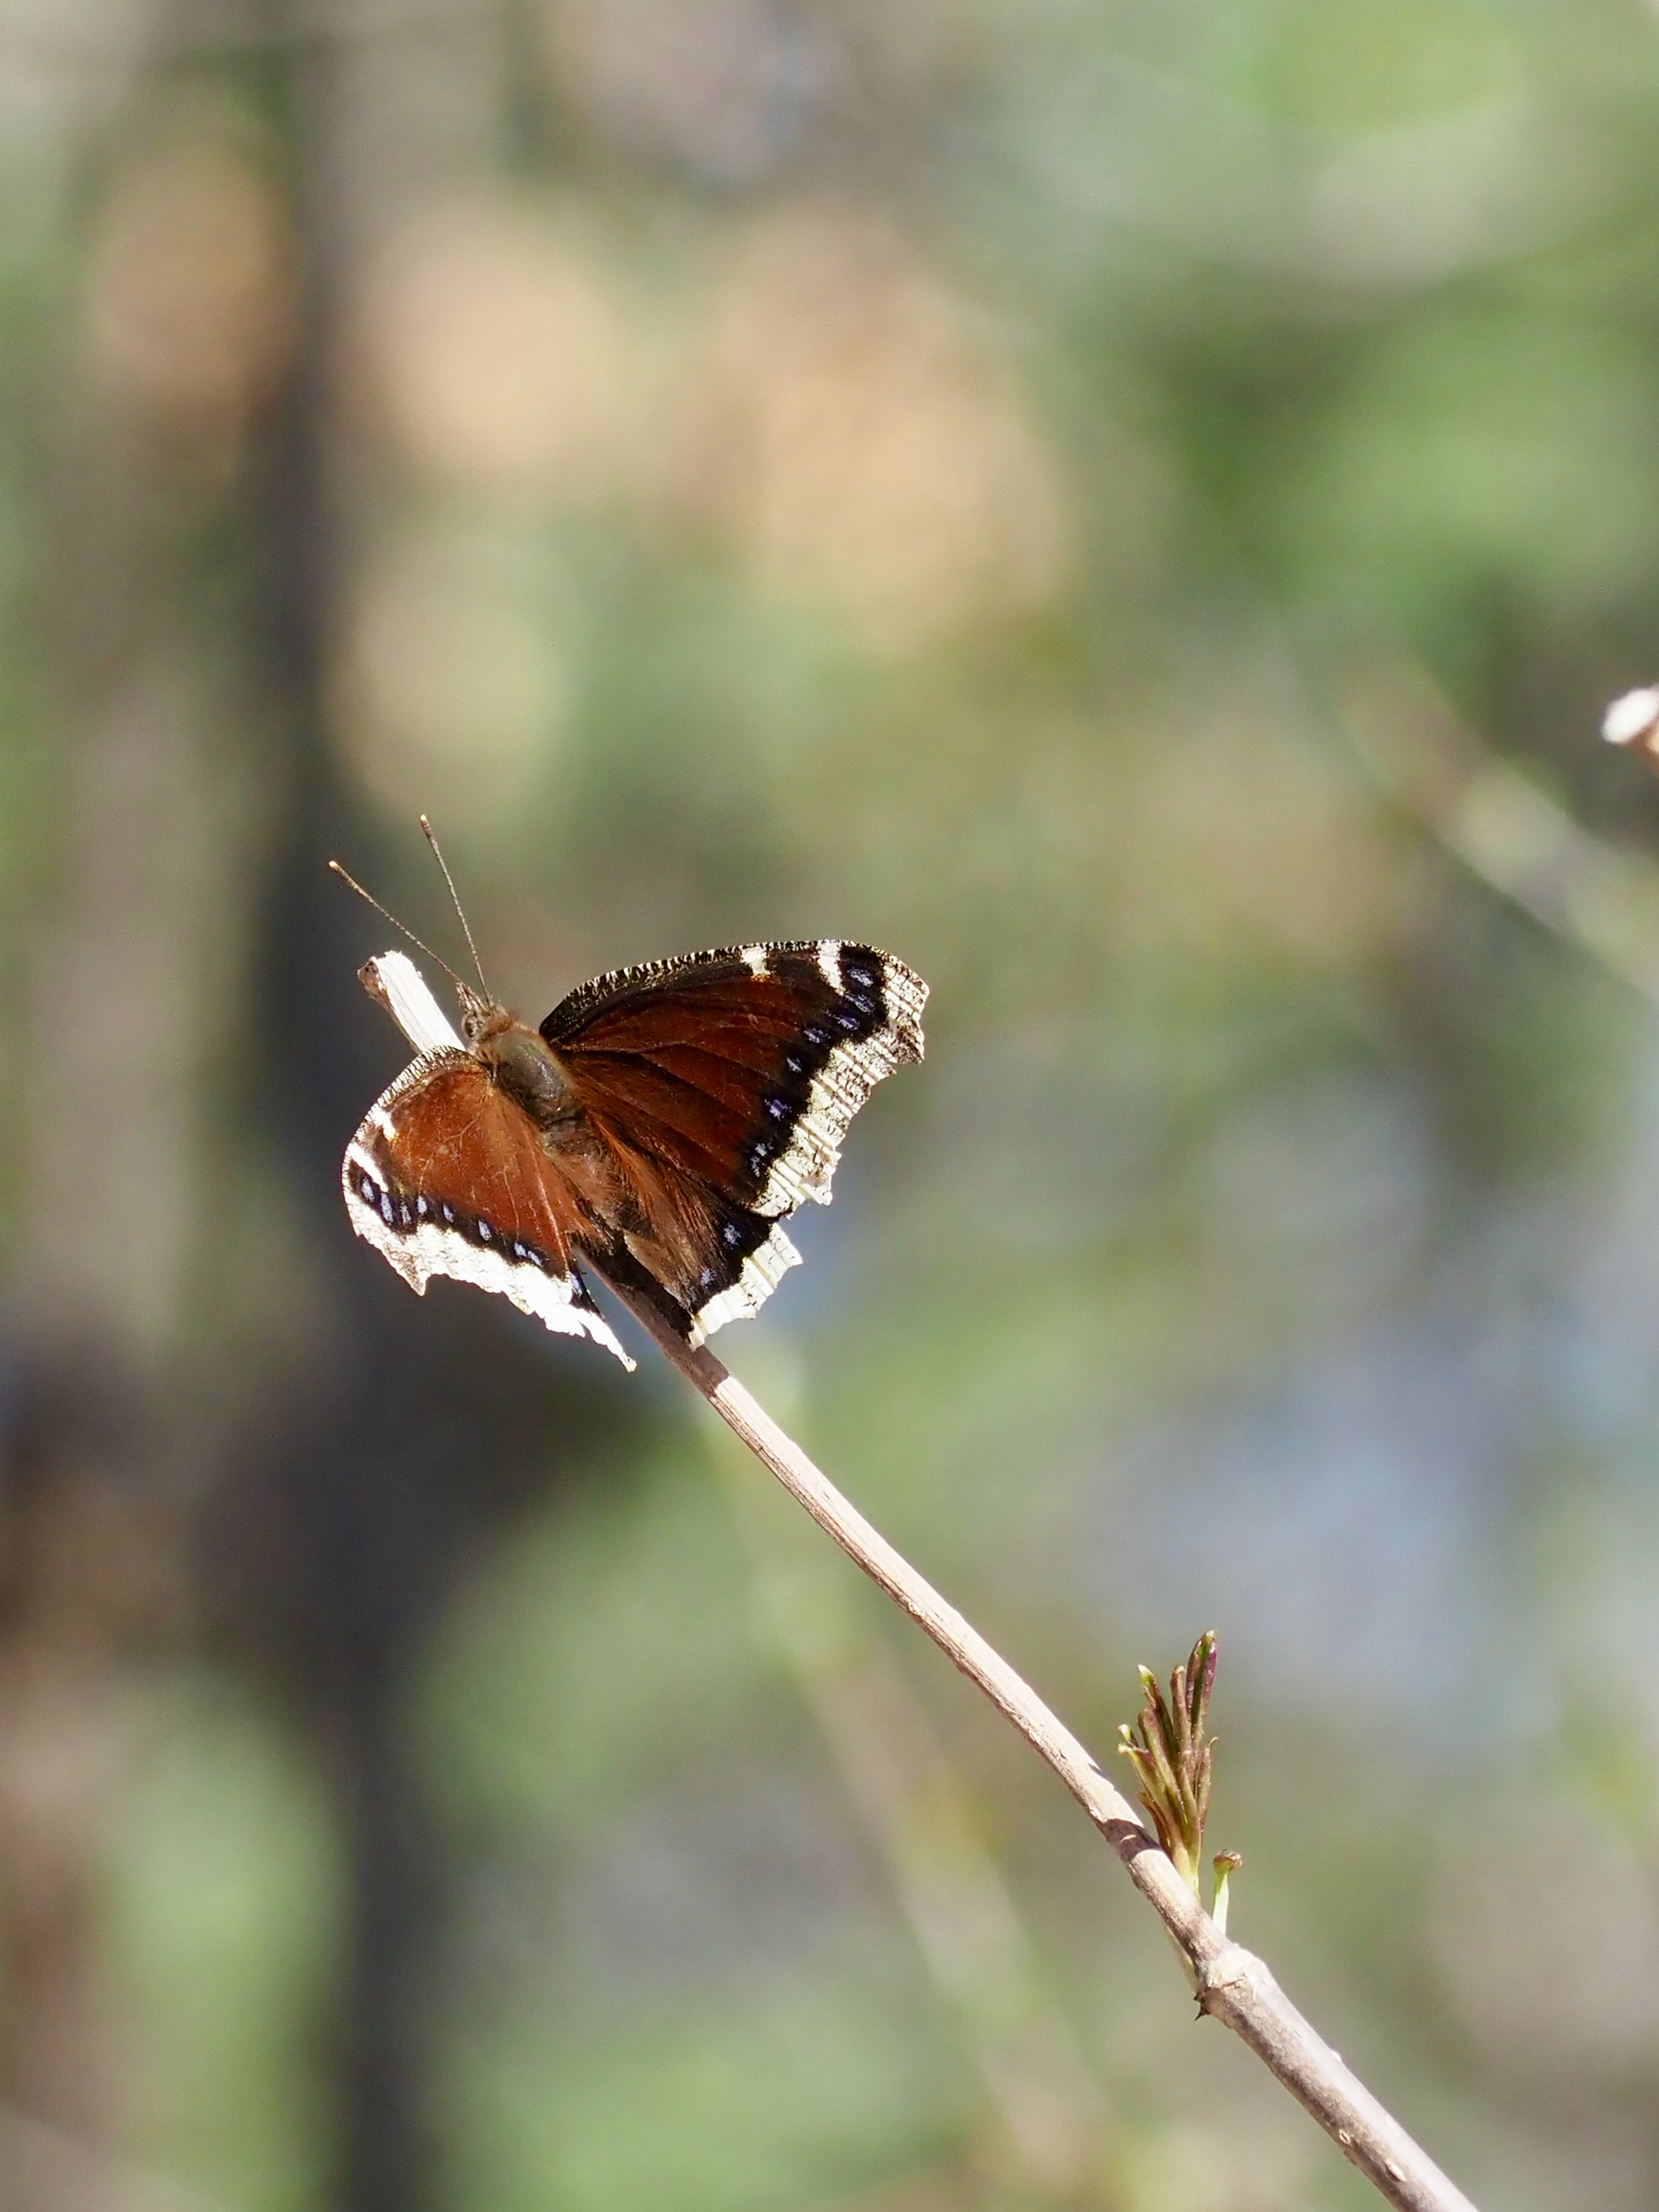 A brown and white Mourning Cloth butterfly resting on a branch